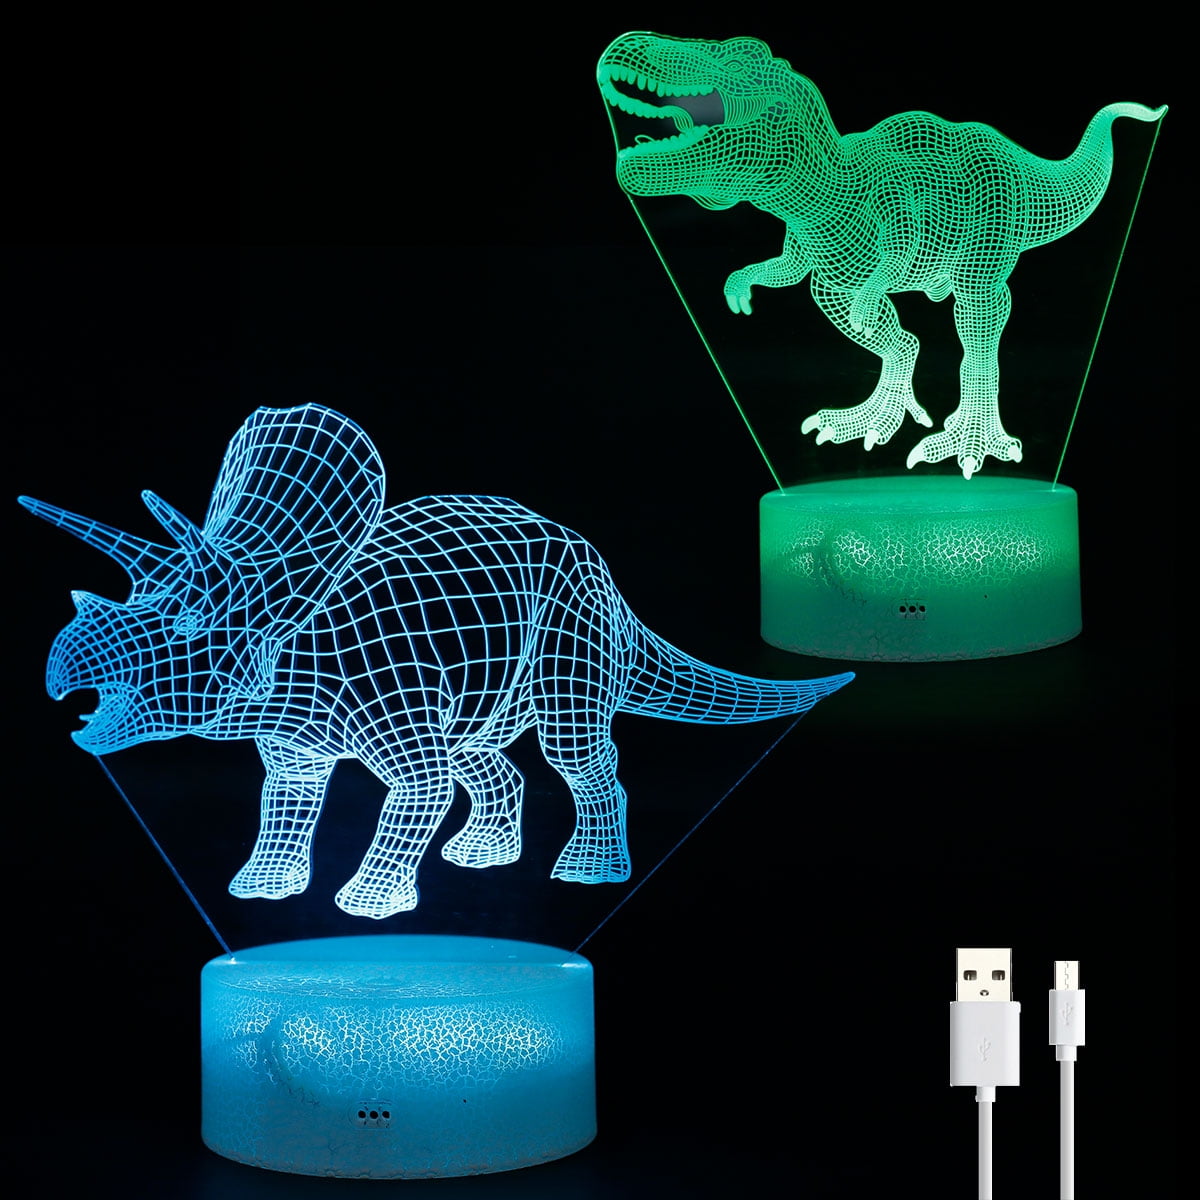 HONRG Dinosaur Light Dinosaur Night Light for Kids Dinosaur lamp with Touch & Remote Control 16 Color Changing Dimmable T Rex Lamp,Dinosaur Toys for 3 4 5 6 7 8 9 Year Old Boys Dinosaur 